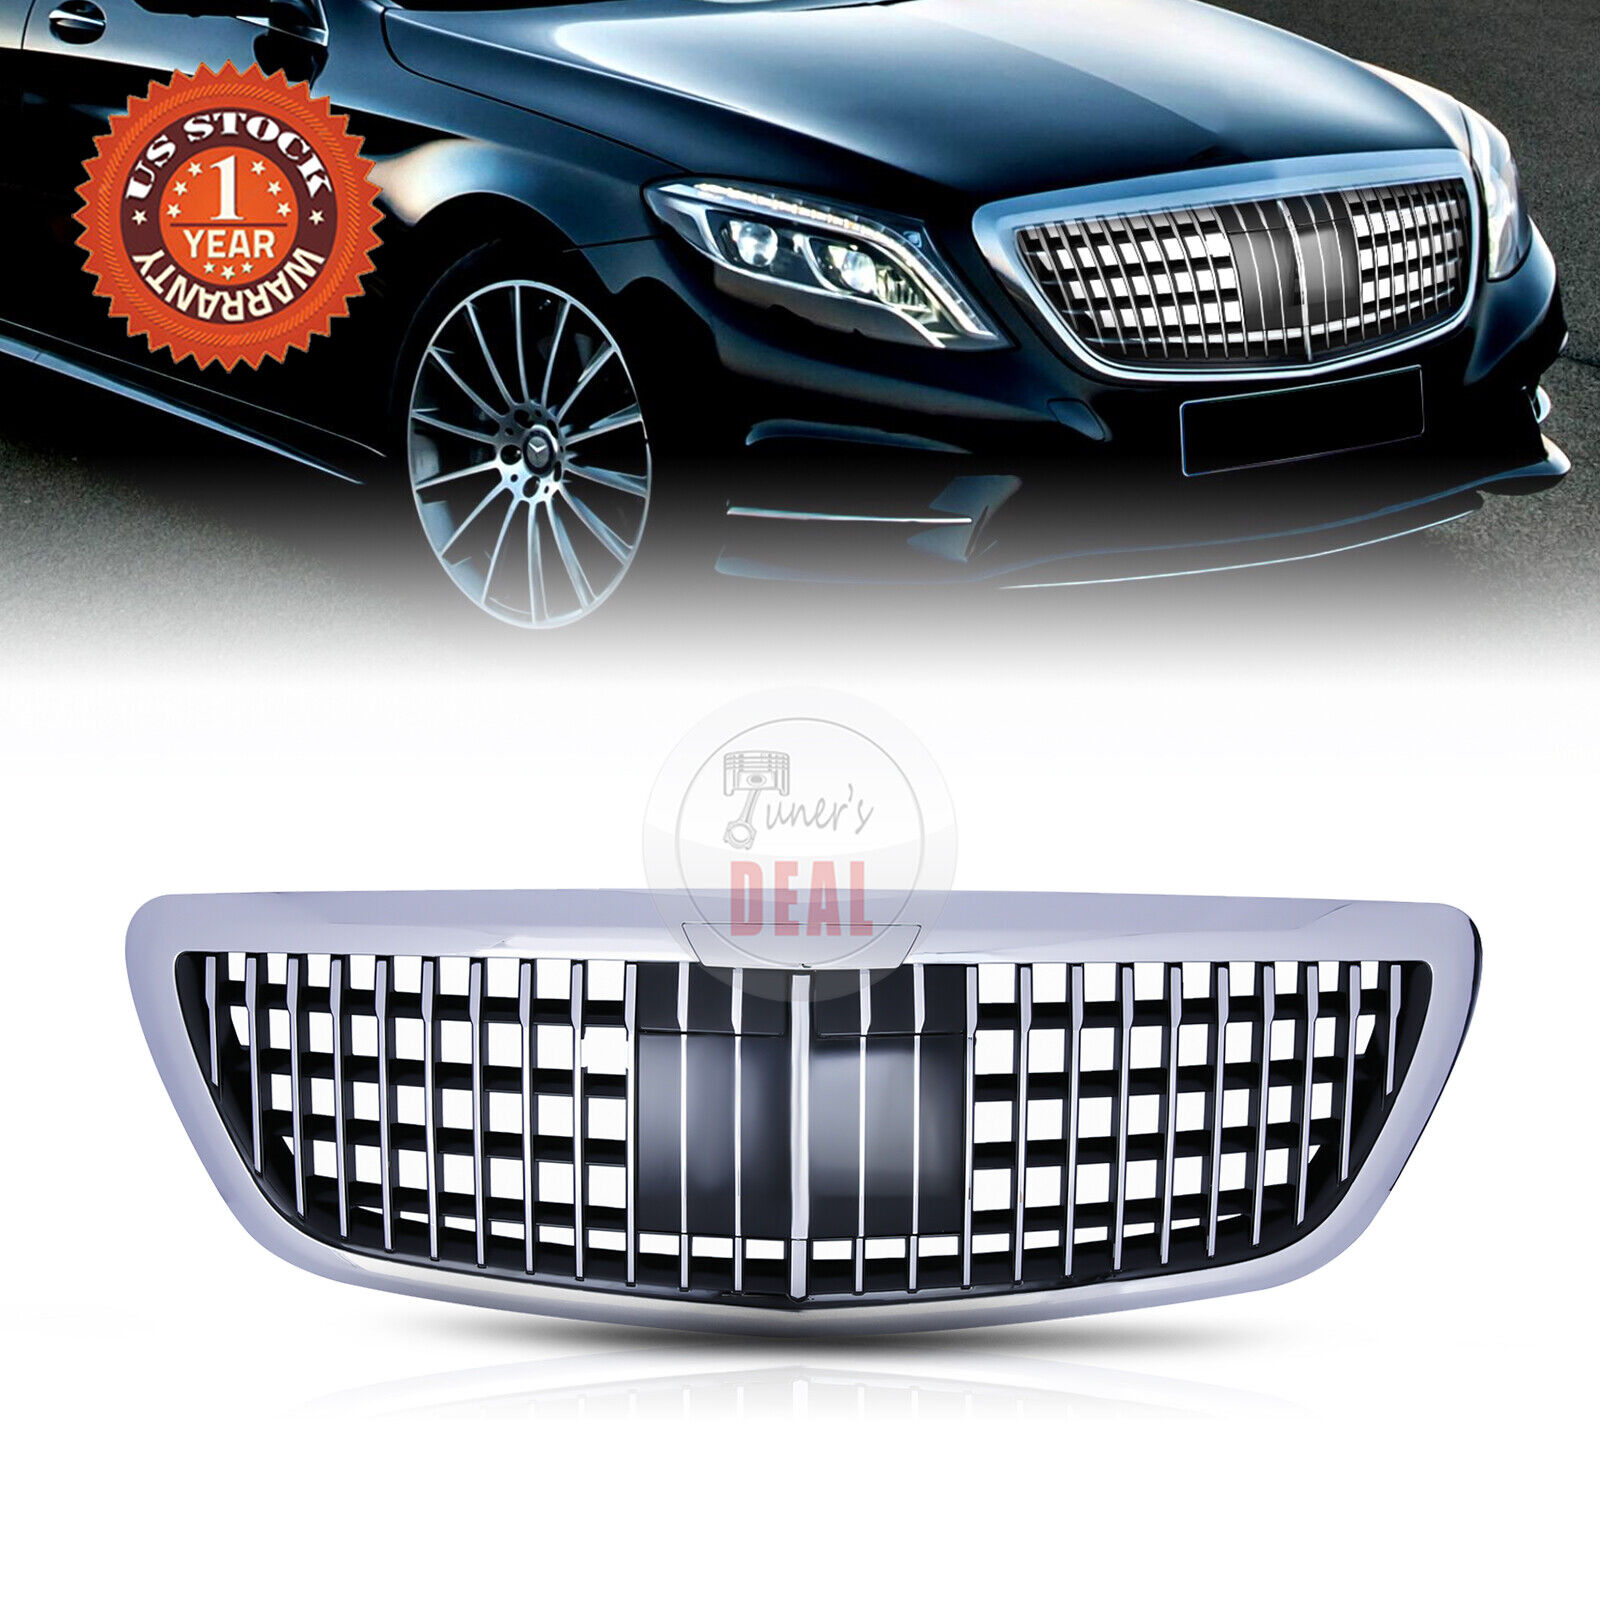 Chrome Front Grille Maybach Style For 2013-2020 Mercedes S class W222 S400 S550